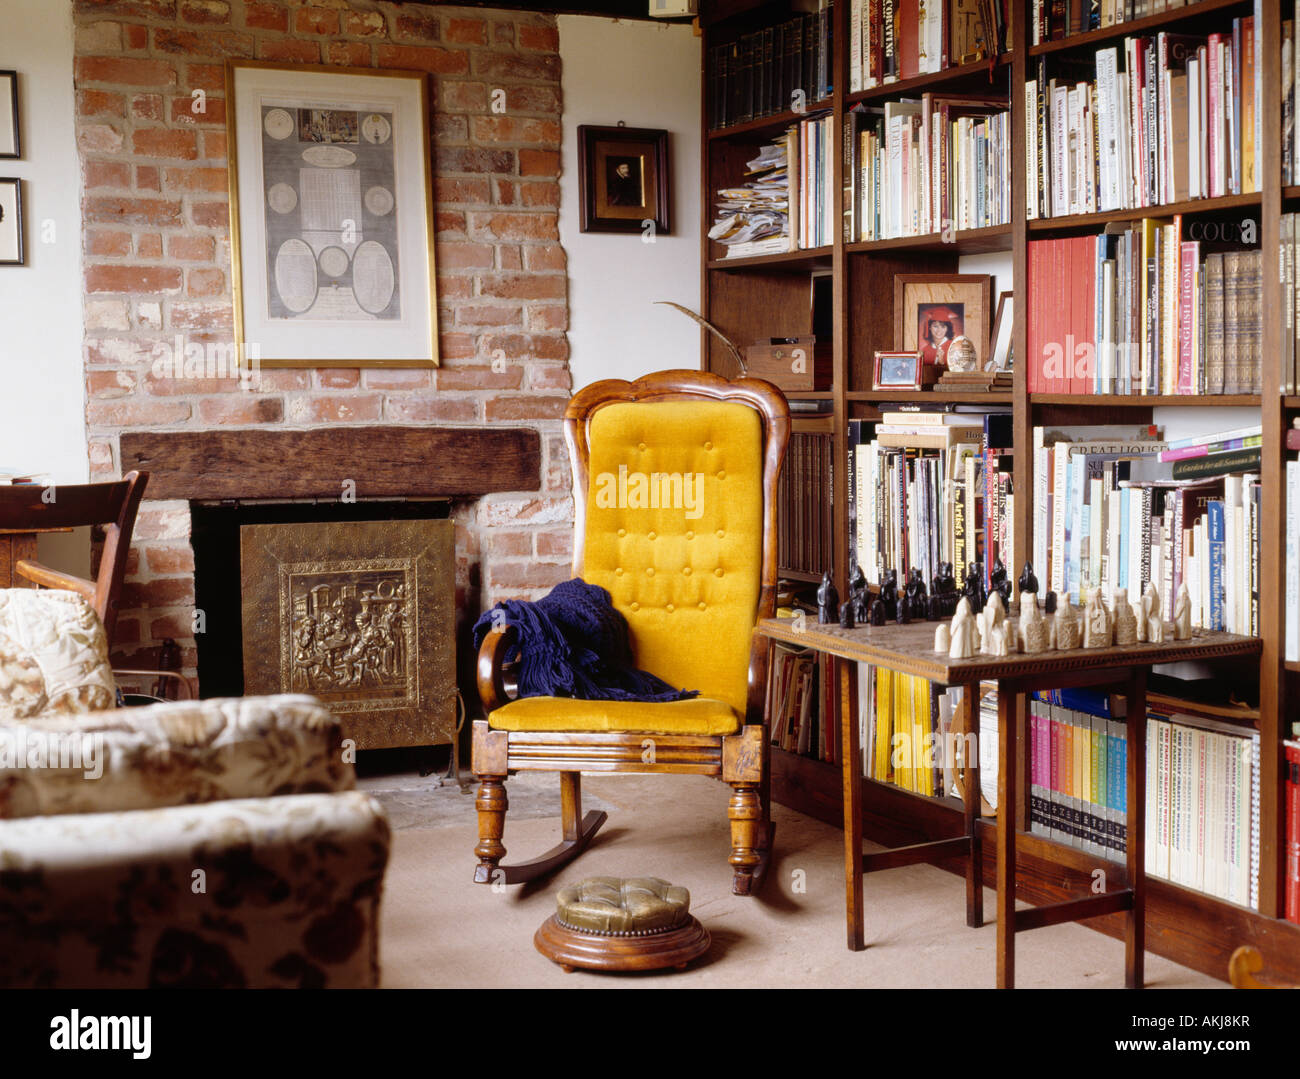 Yellow armchair and chess set on table in front of bookshelves in ...